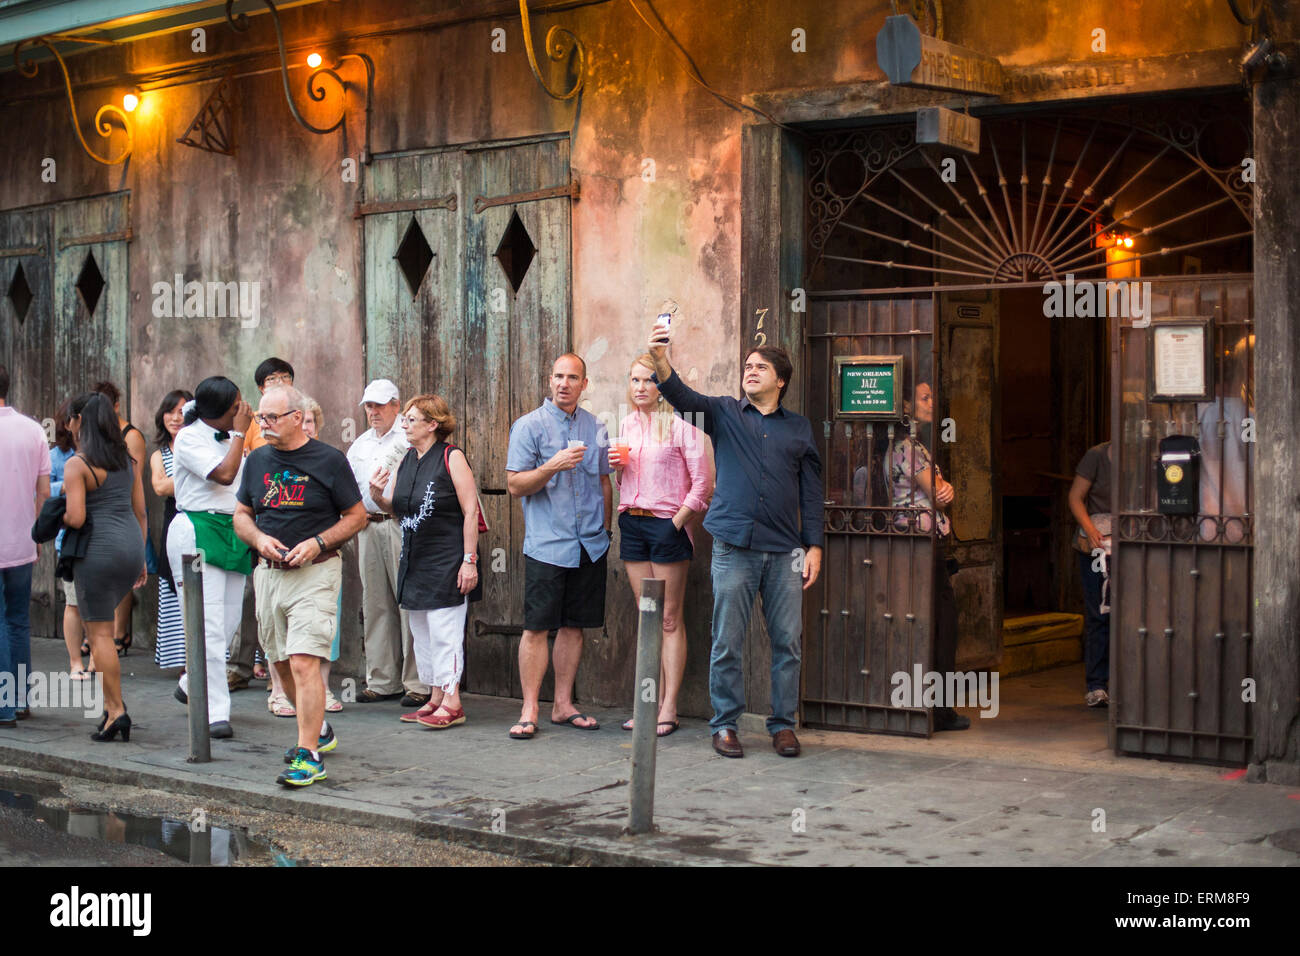 New Orleans, Louisiana - People line up outside Preservation Hall, waiting for a jazz concert to begin. Stock Photo